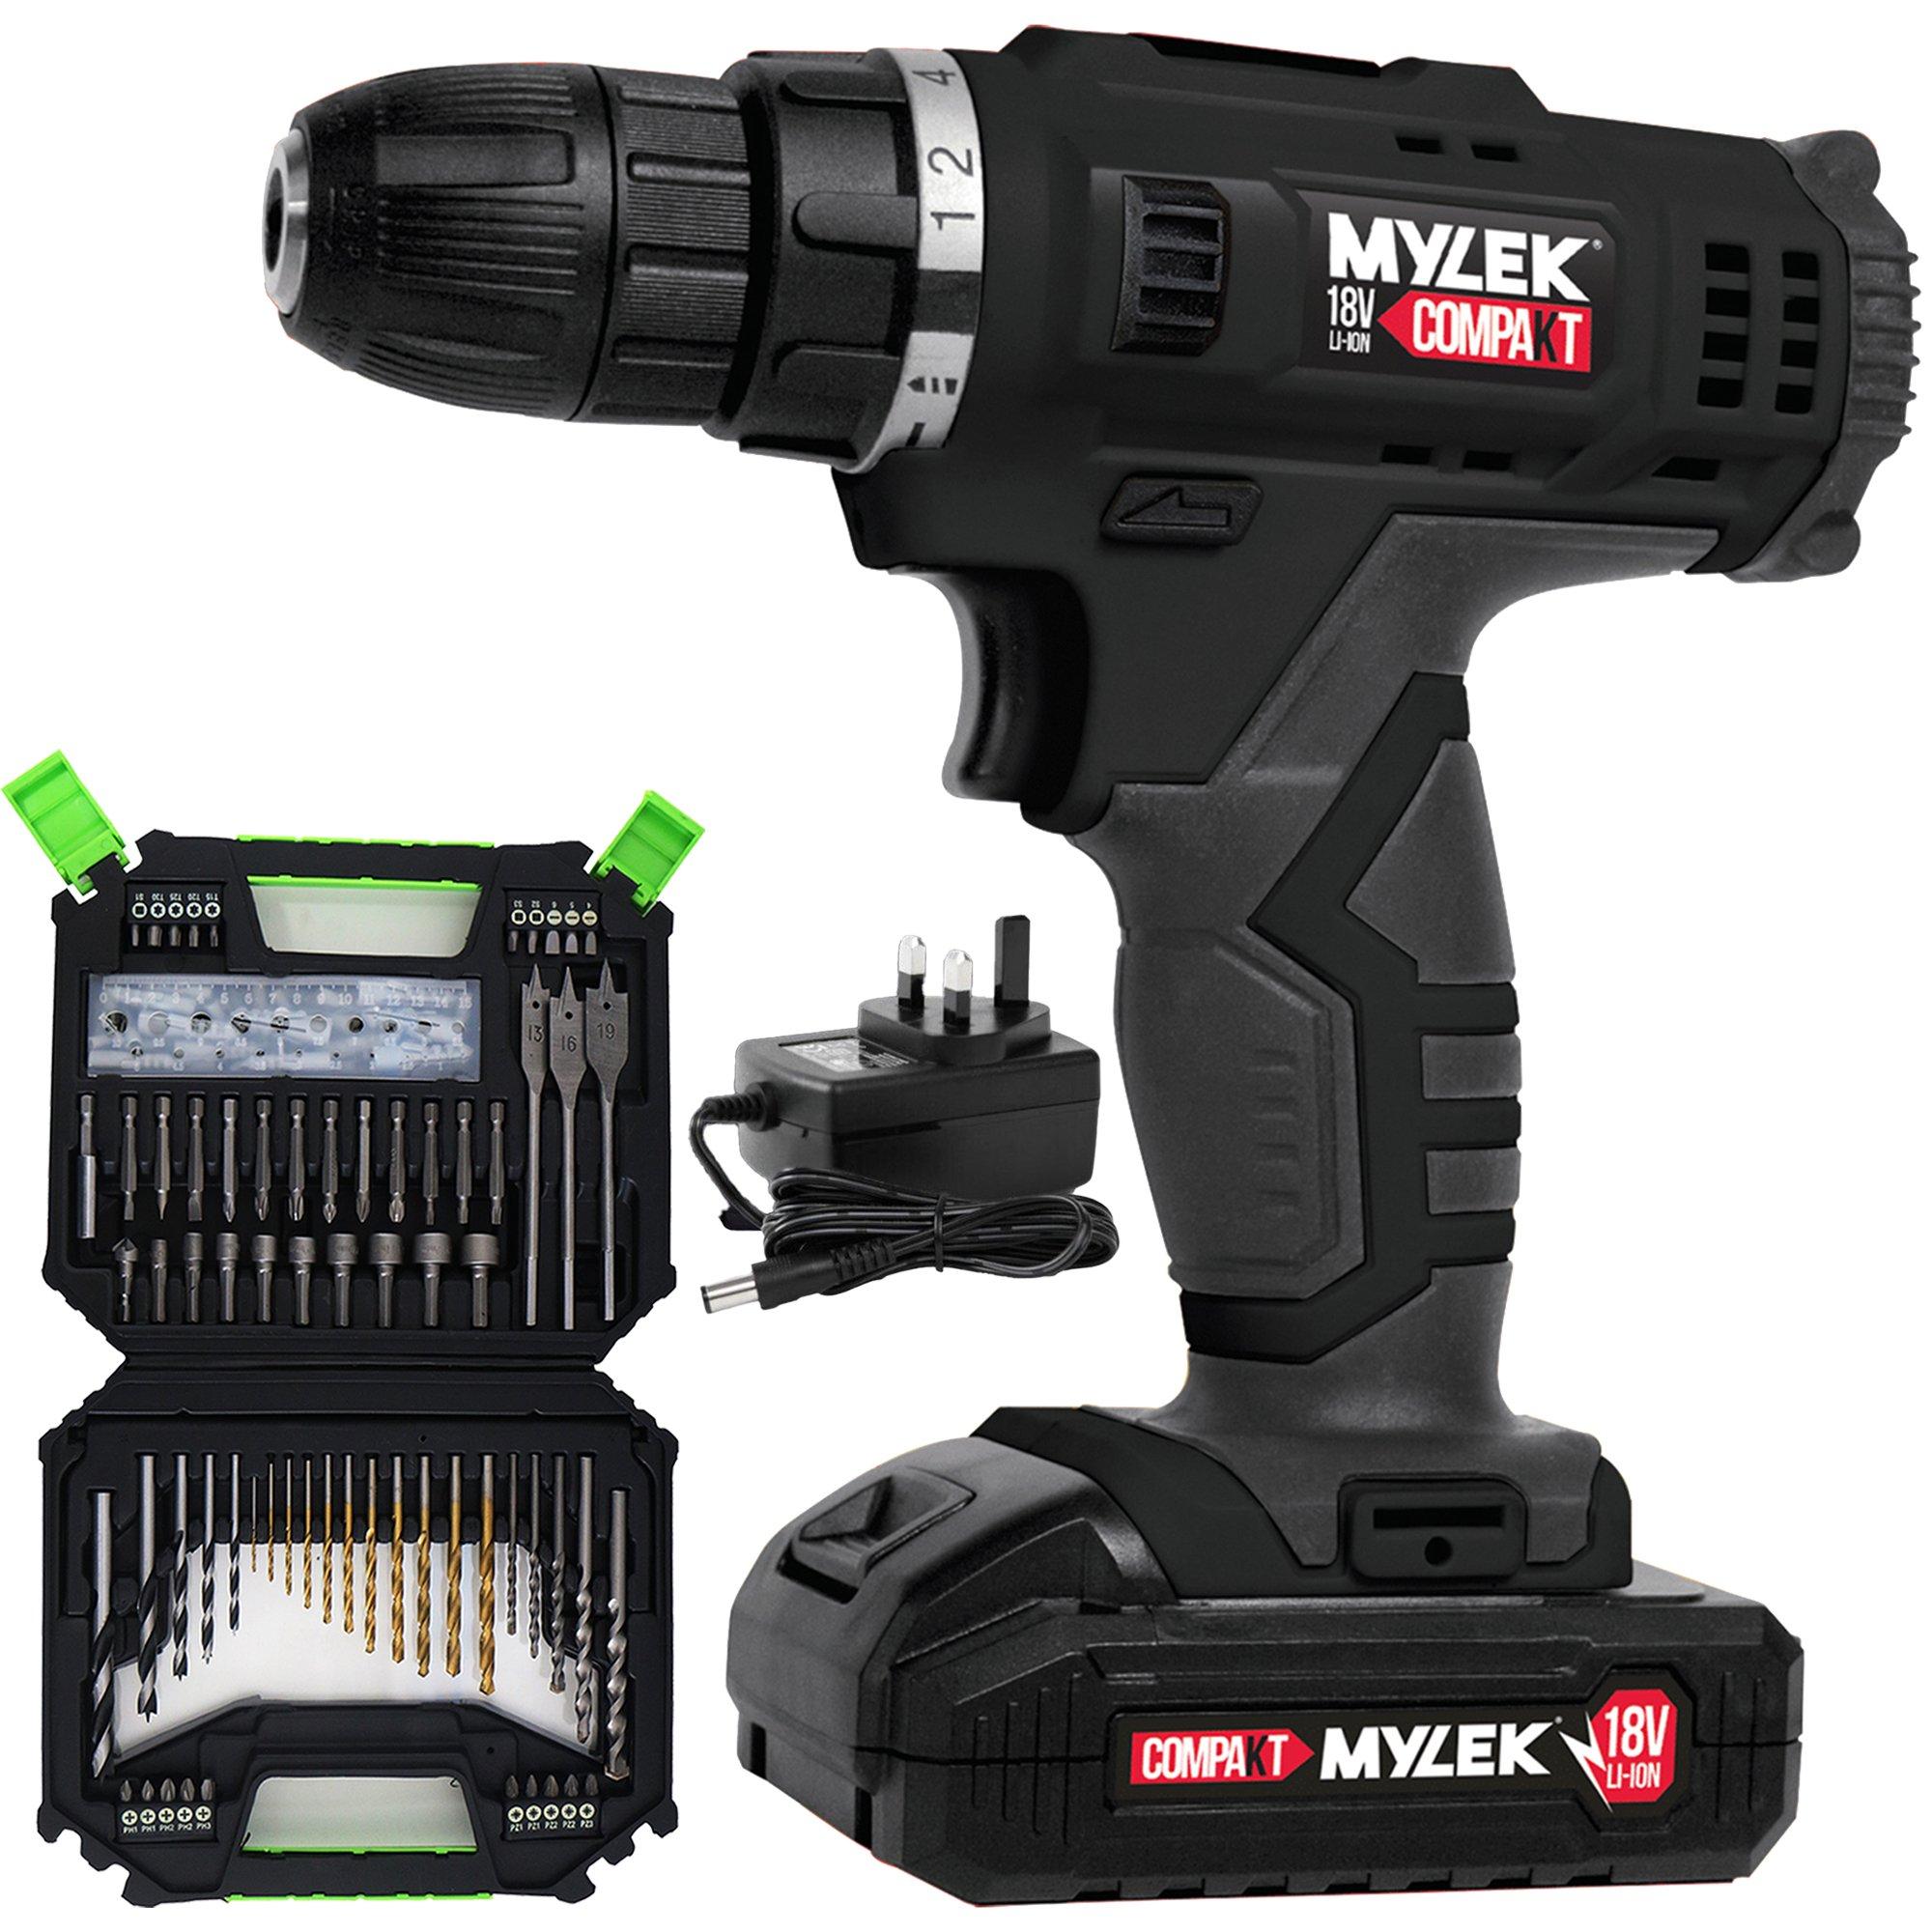 Cordless Drill MYW09 with 128-Piece Accessory Kit